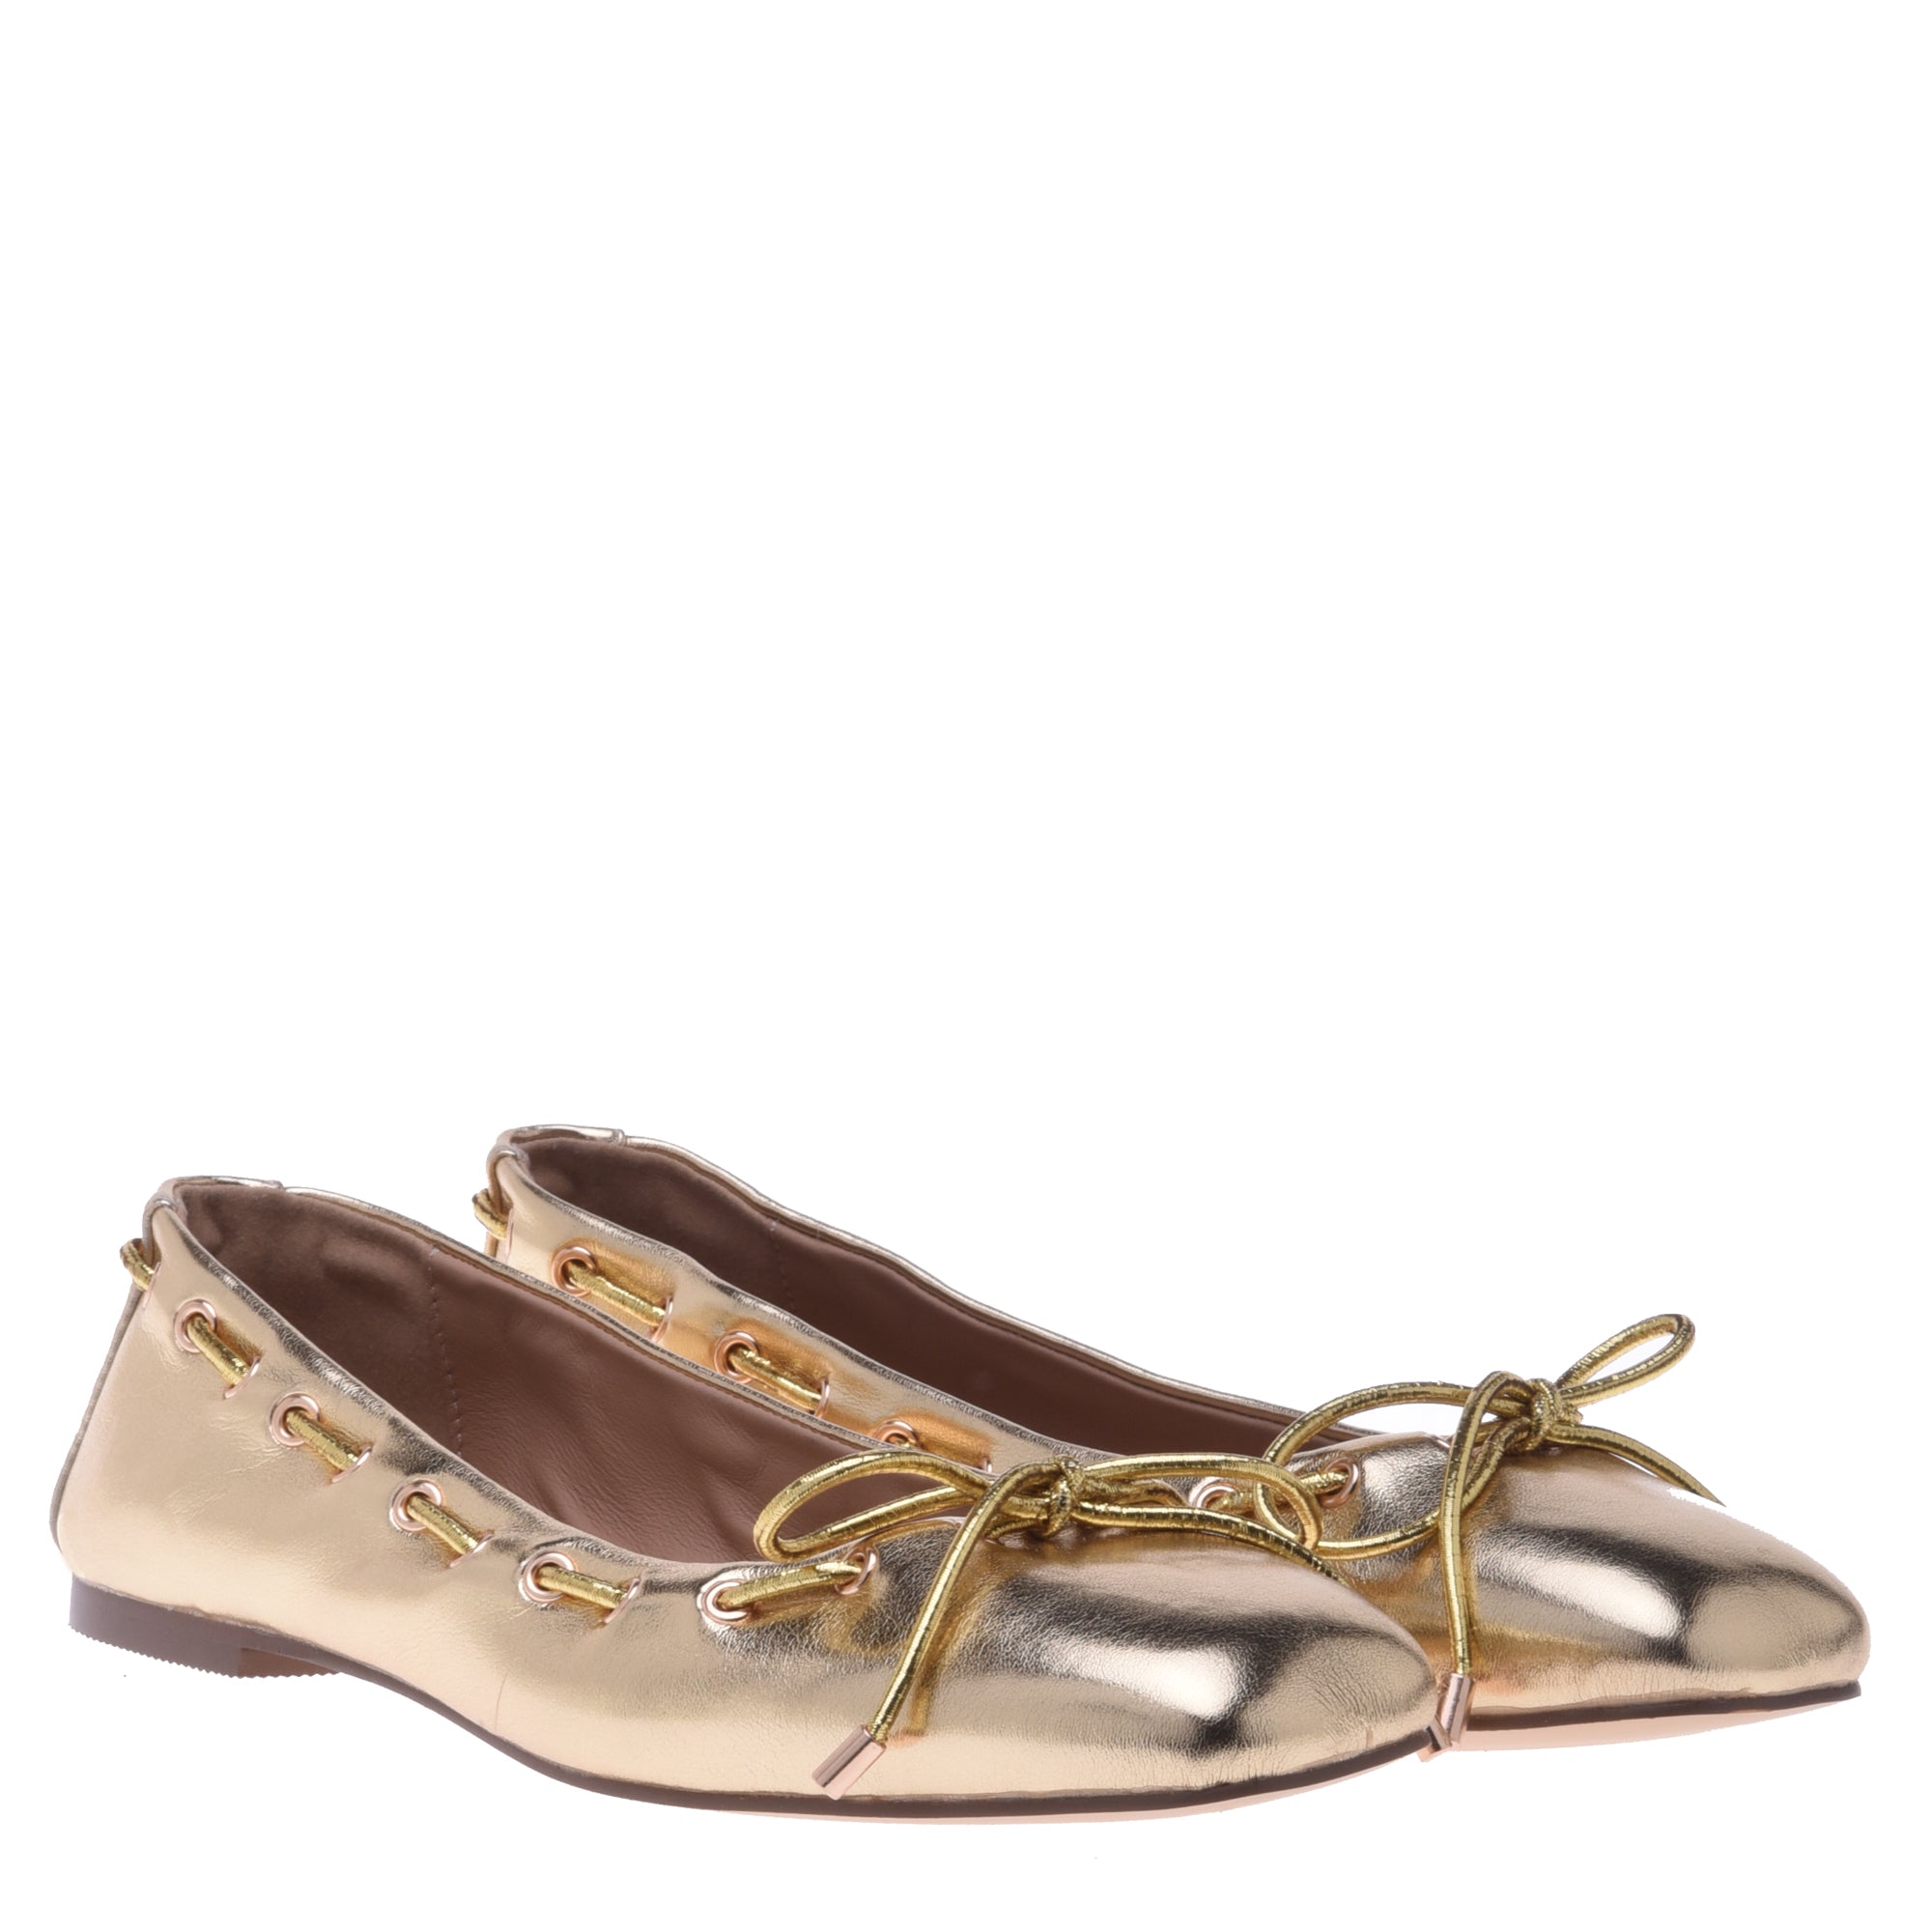 Ballerina pump in gold nappa leather